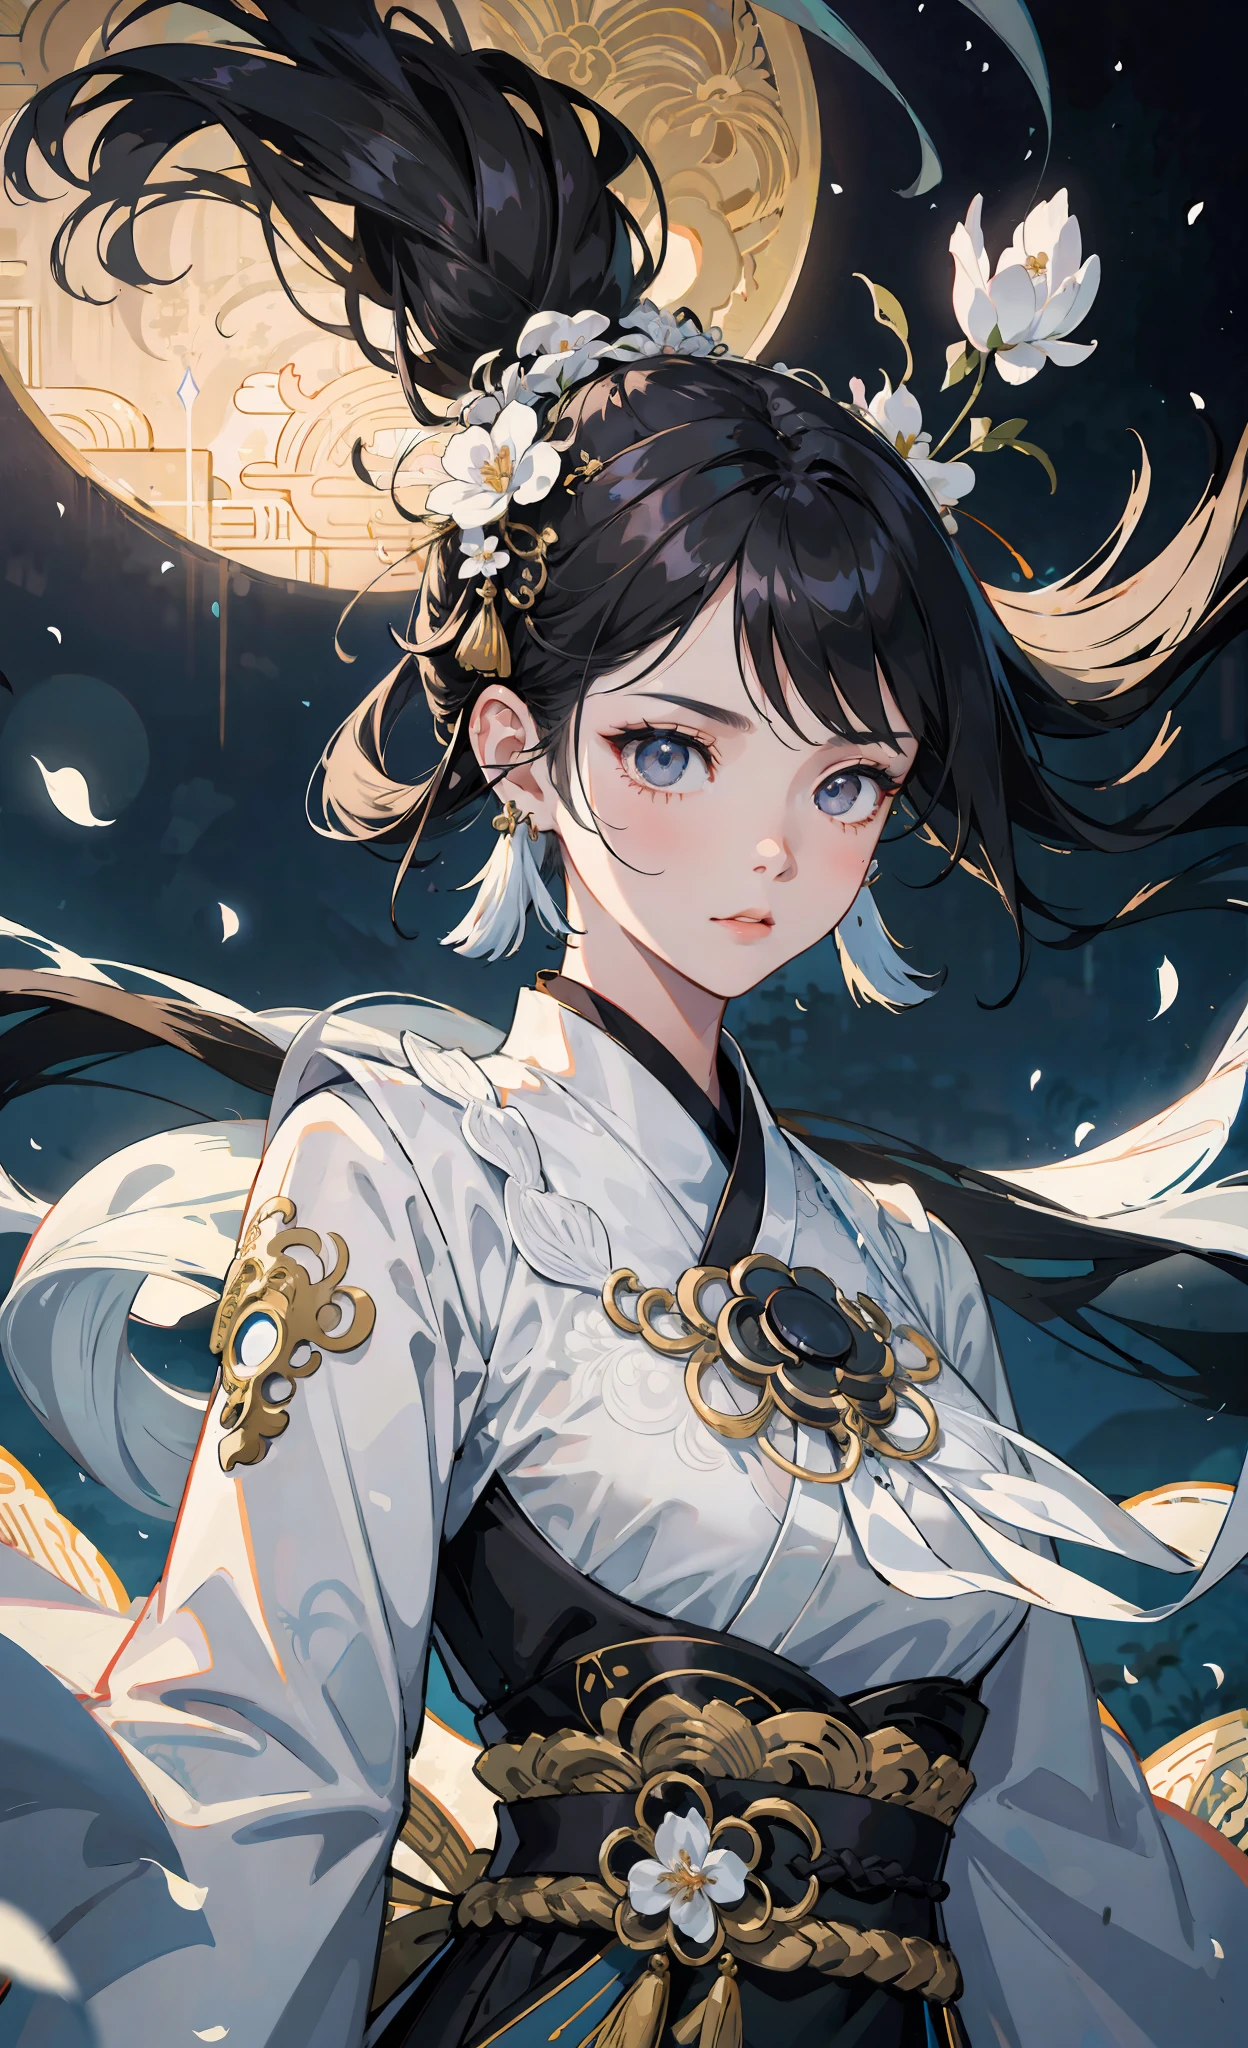 Official Art Illustration, Girl, Black Eyes, Black Hair Color, Floating Hair, Hairpin, Delicate Eyes, Intricate White Hanfu, Gorgeous Accessories, Intricate Filigree, Wearing Earrings, FOV, F/1.8, Masterpiece, Background with Ancient Chinese Style Architecture, Night, Petals Flying, Frontal Perspective, Chang'e, Side Light, Moonlight Shining on People, 8K, Hazy